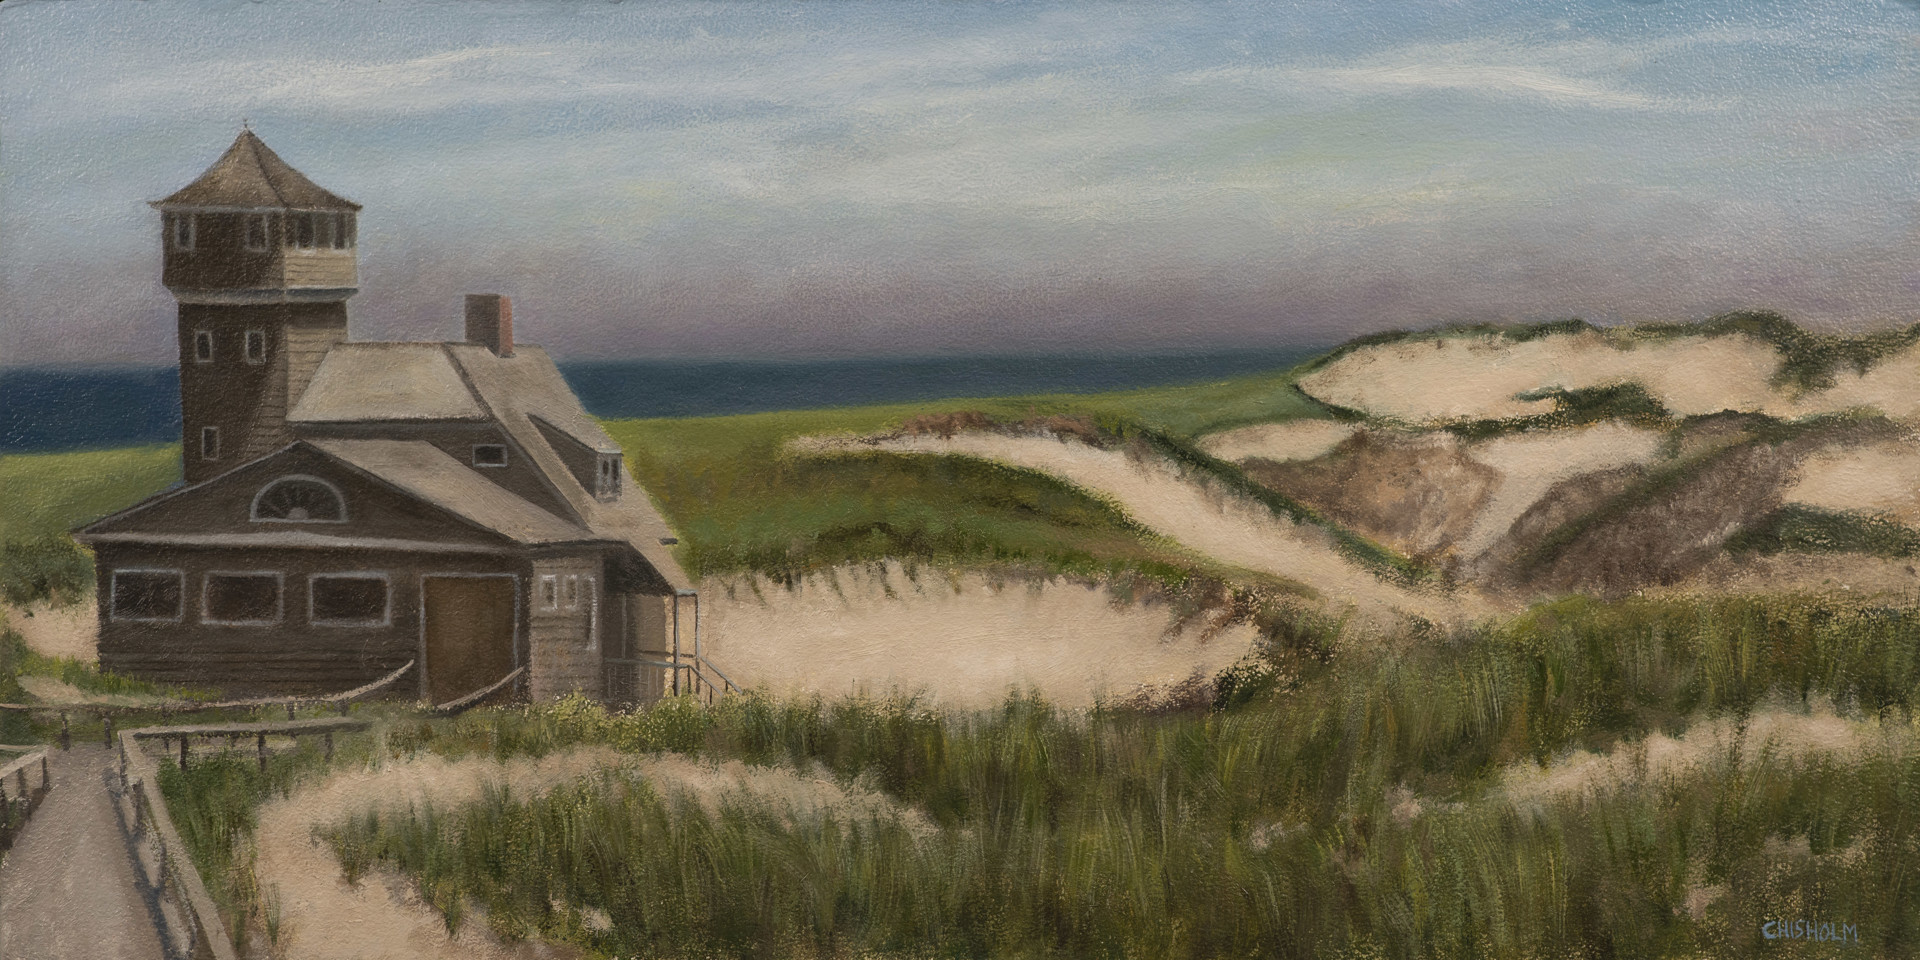 Dune & Museum by Bill Chisholm